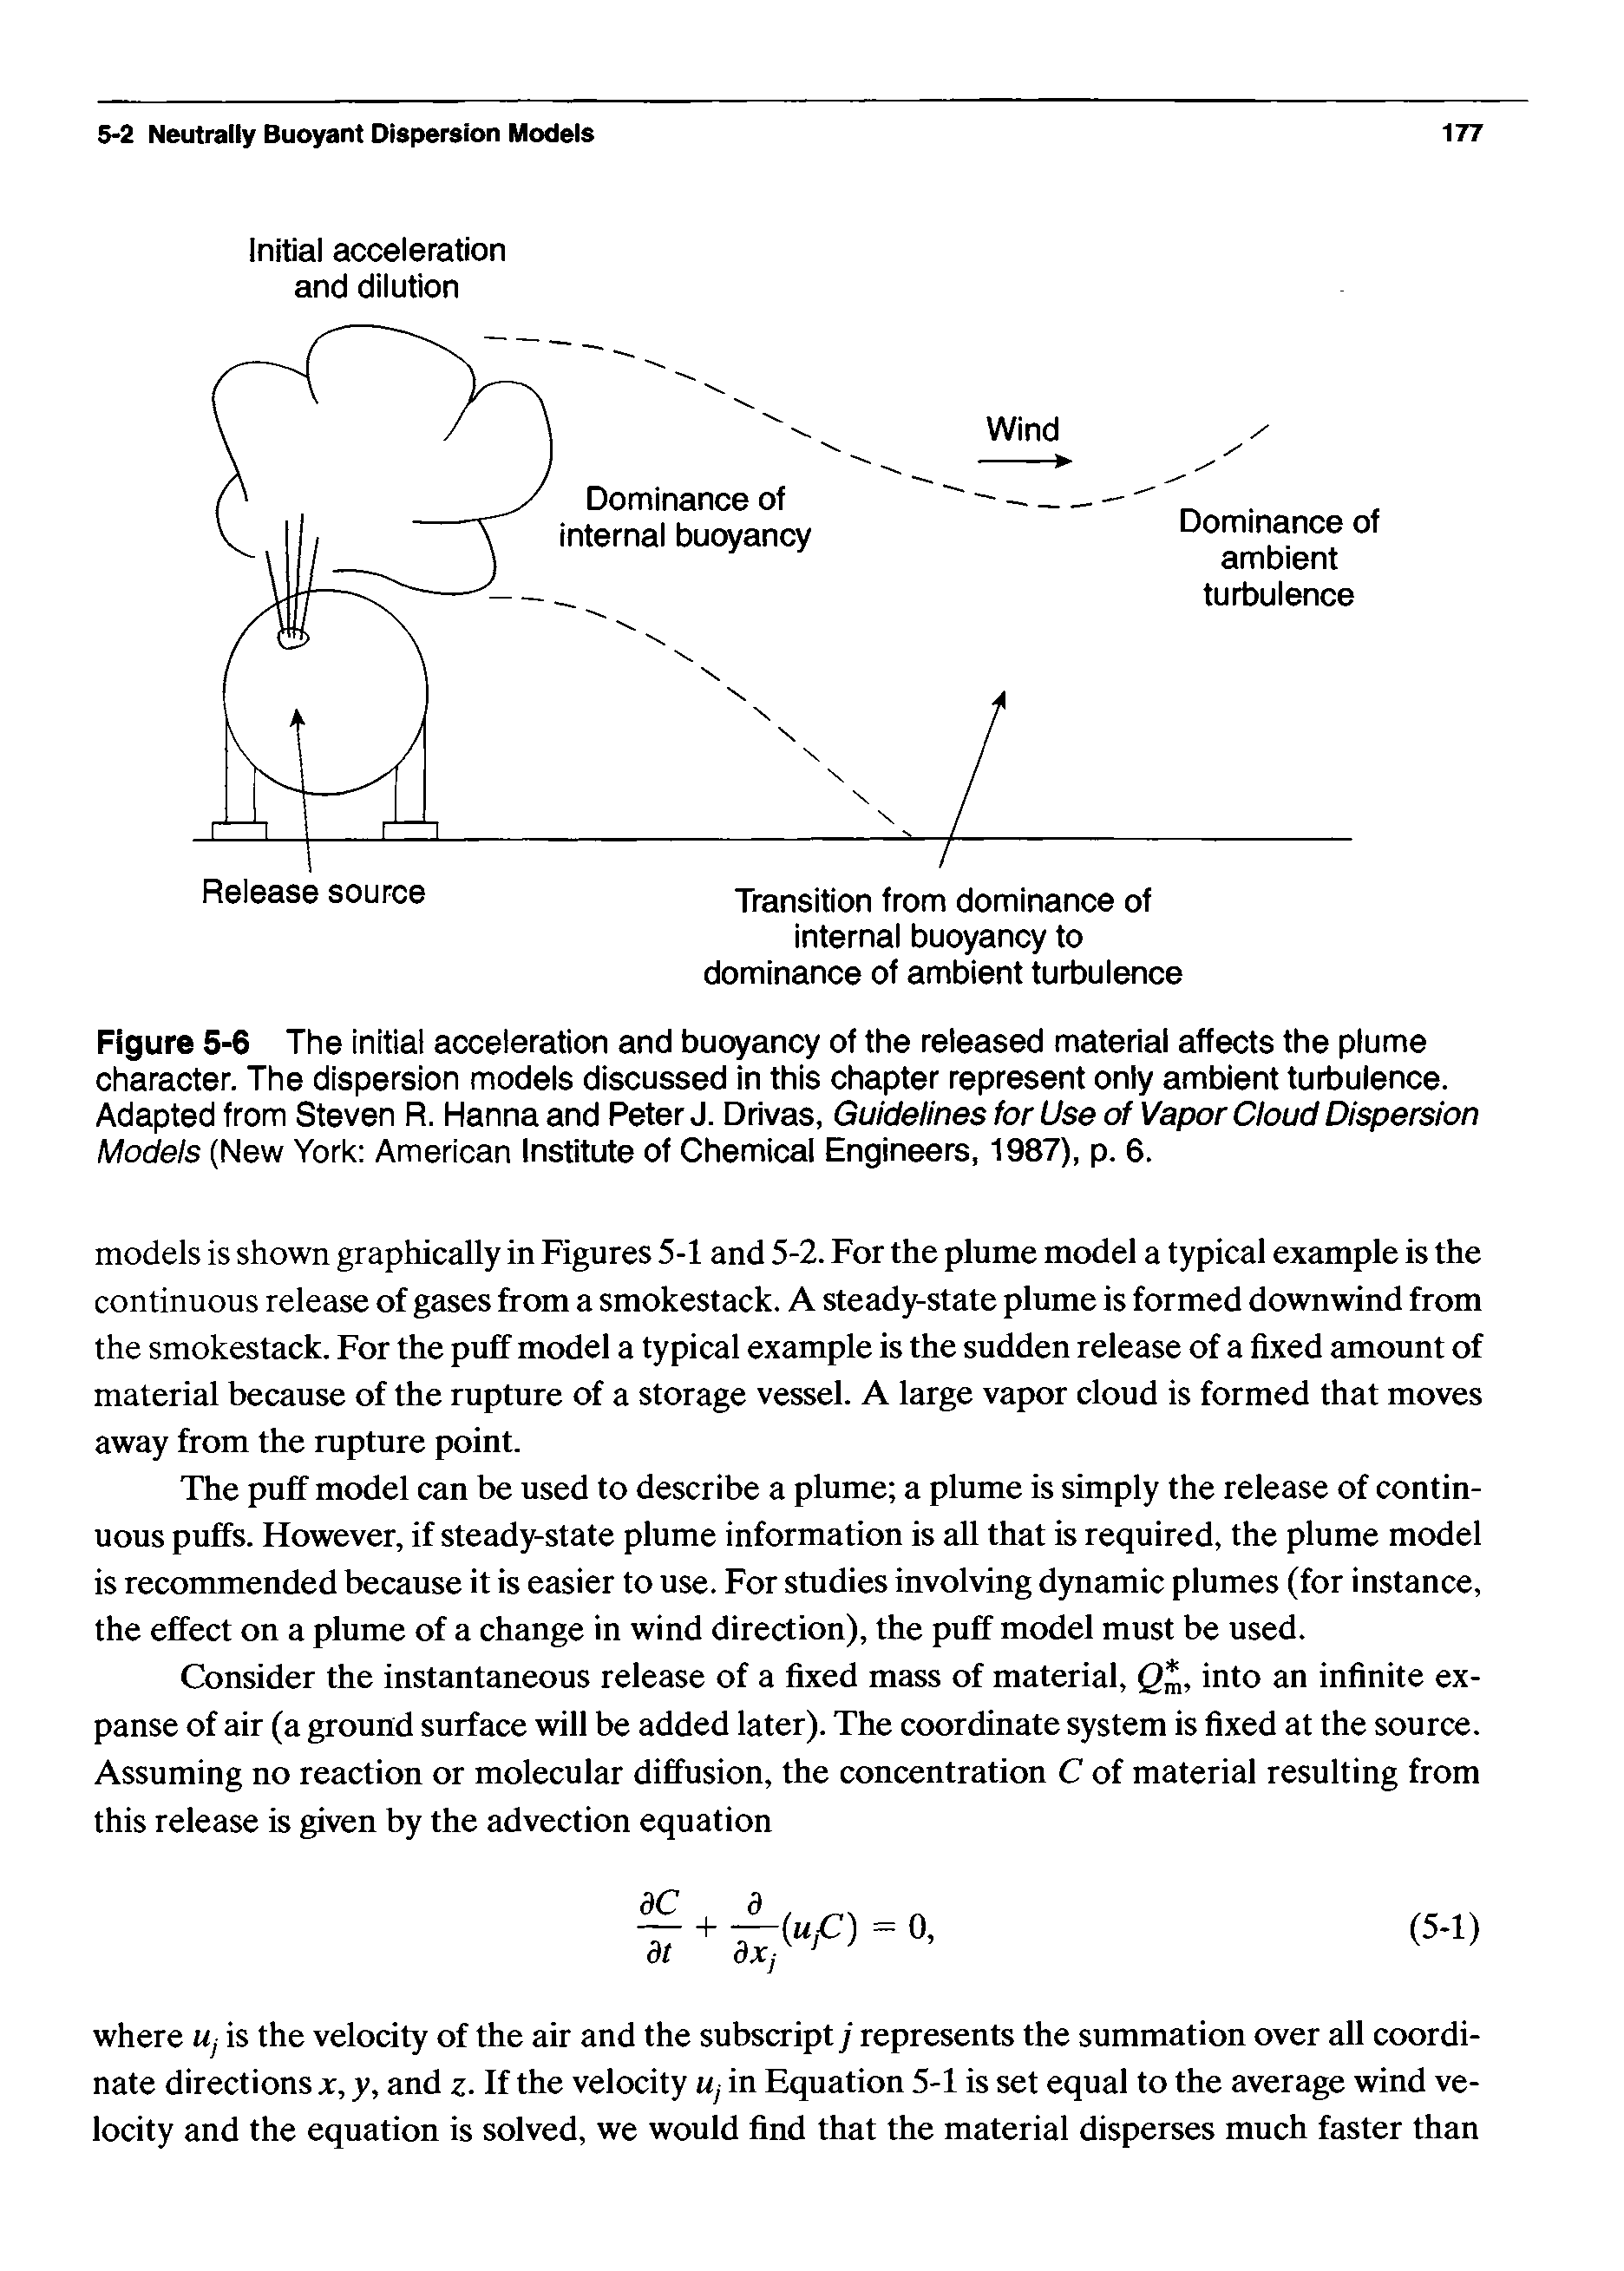 Figure 5-6 The initial acceleration and buoyancy of the released material affects the plume character. The dispersion models discussed in this chapter represent only ambient turbulence. Adapted from Steven R. Hanna and Peter J. Drivas, Guidelines for Use of Vapor Cloud Dispersion Models (New York American Institute of Chemical Engineers, 1987), p. 6.